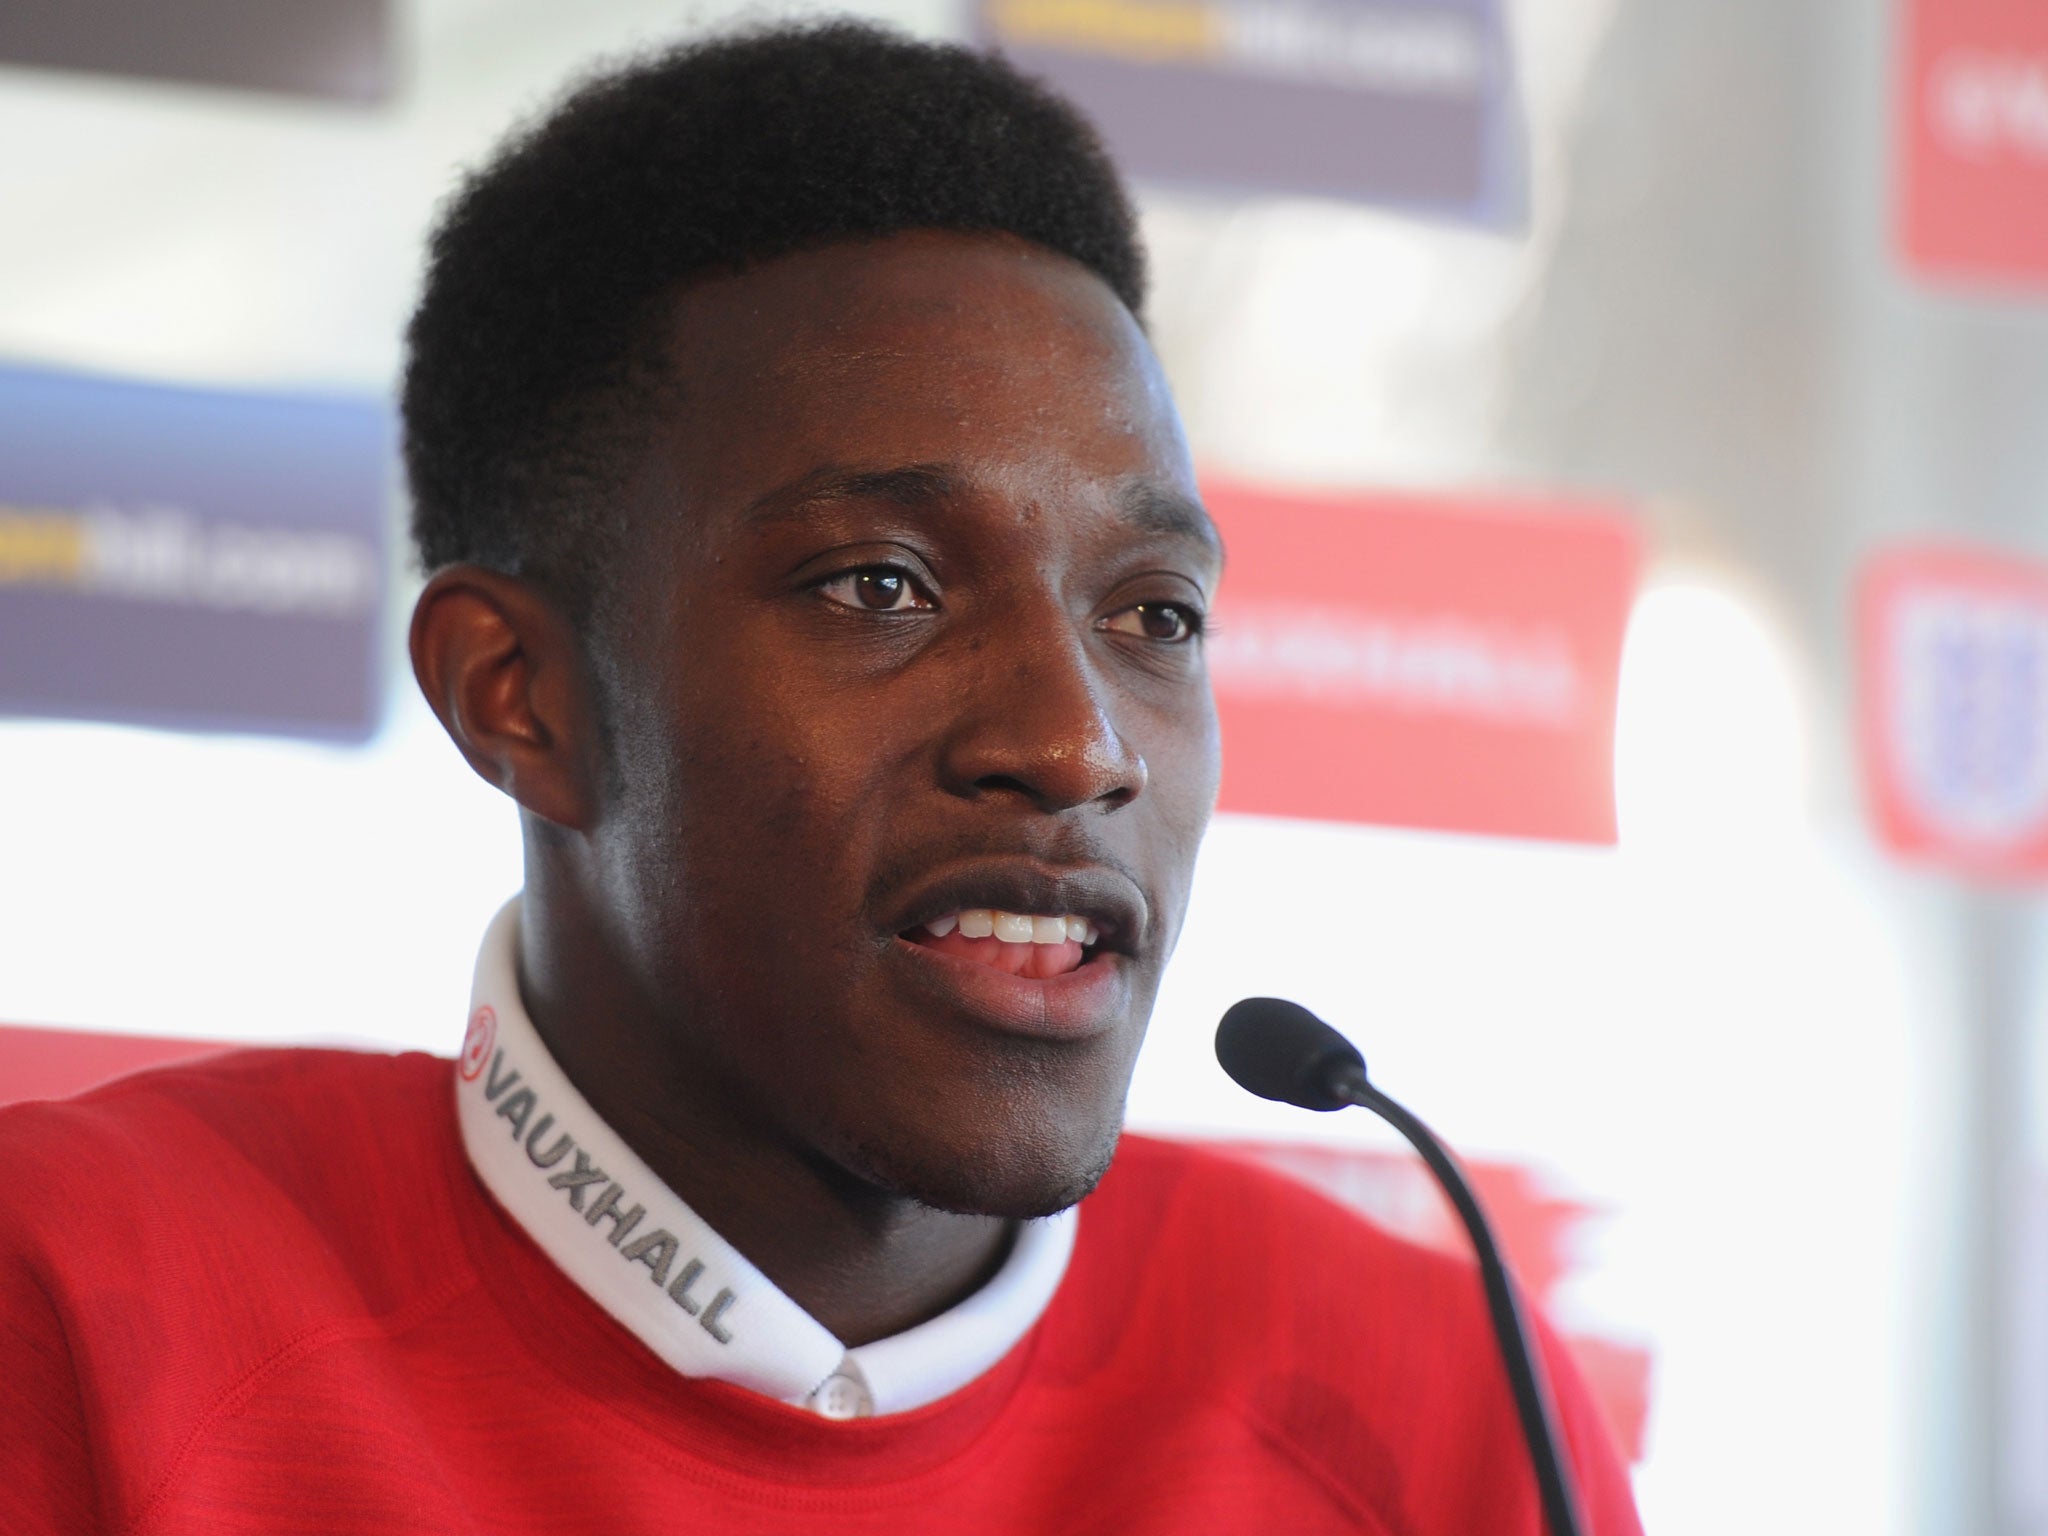 Danny Welbeck says he has been frustrated at having to play on the left